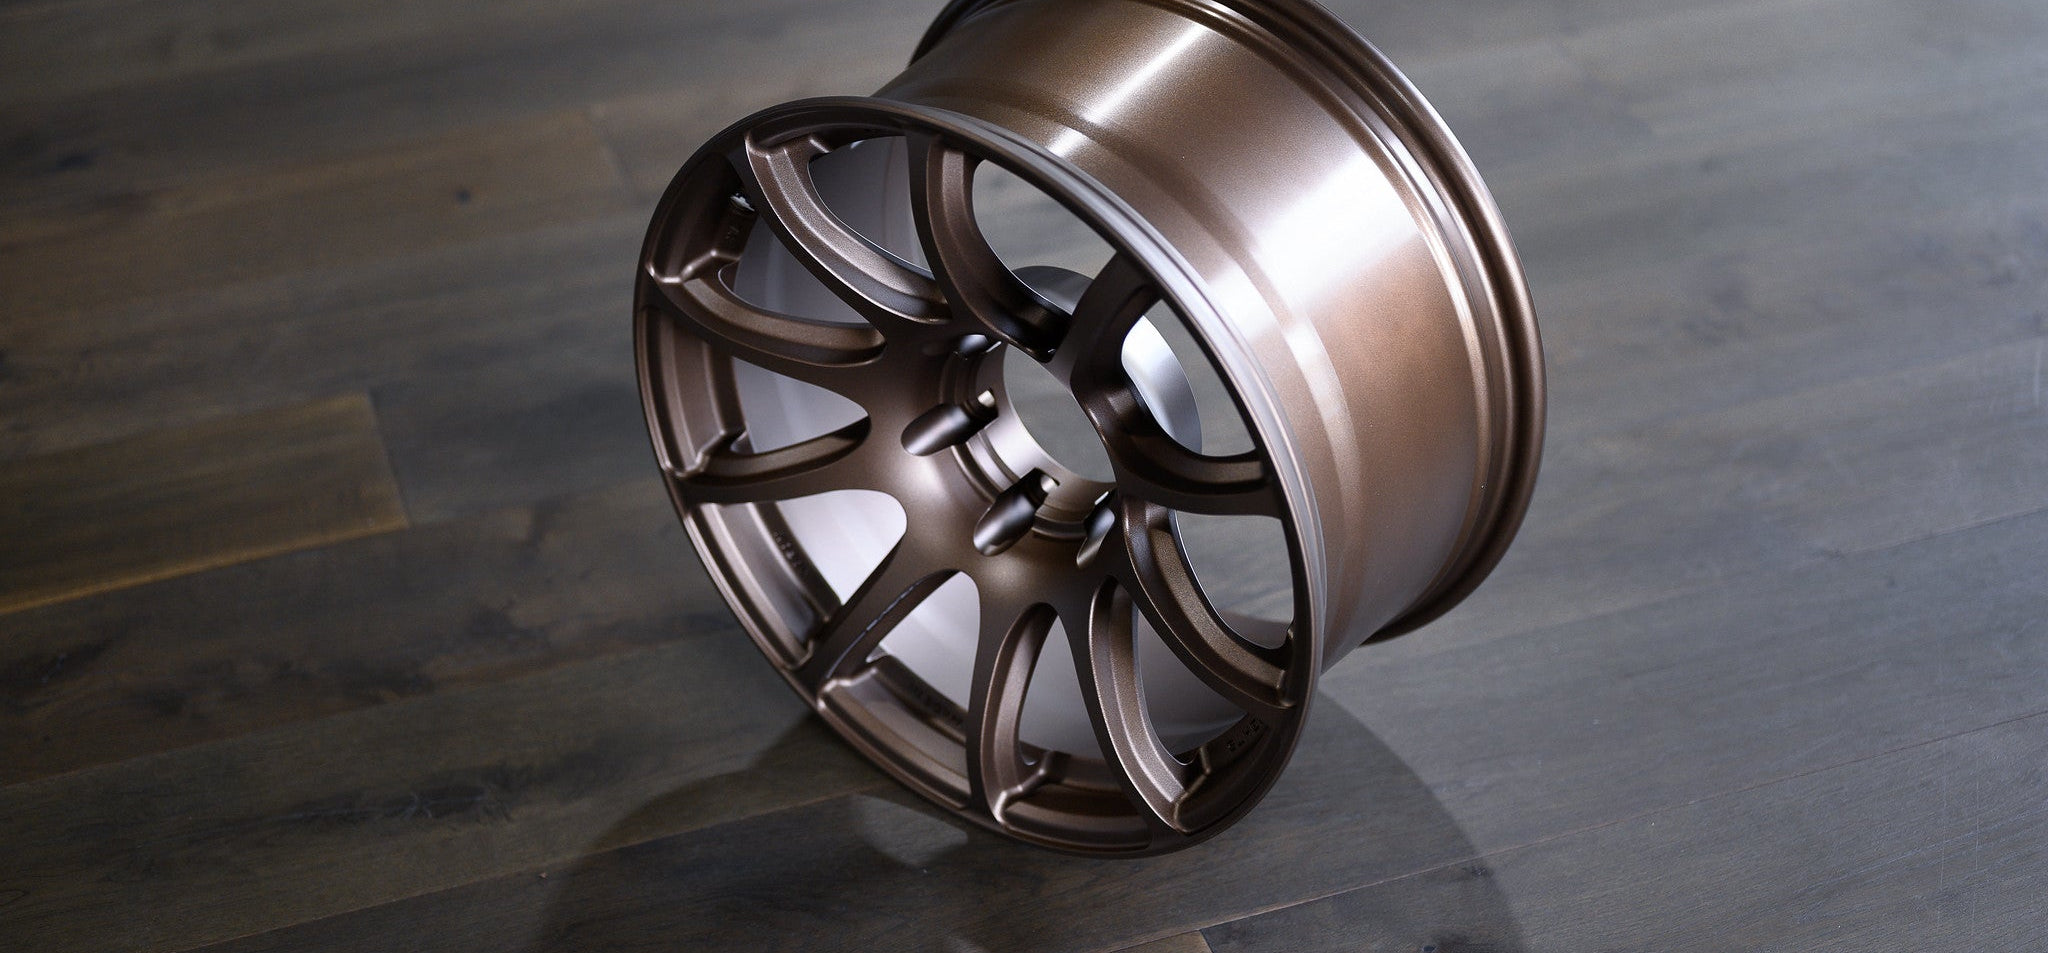 gramLIGHTS 57Trans-X - Premium Wheels from Gram Lights - From just $2390.00! Shop now at MK MOTORSPORTS